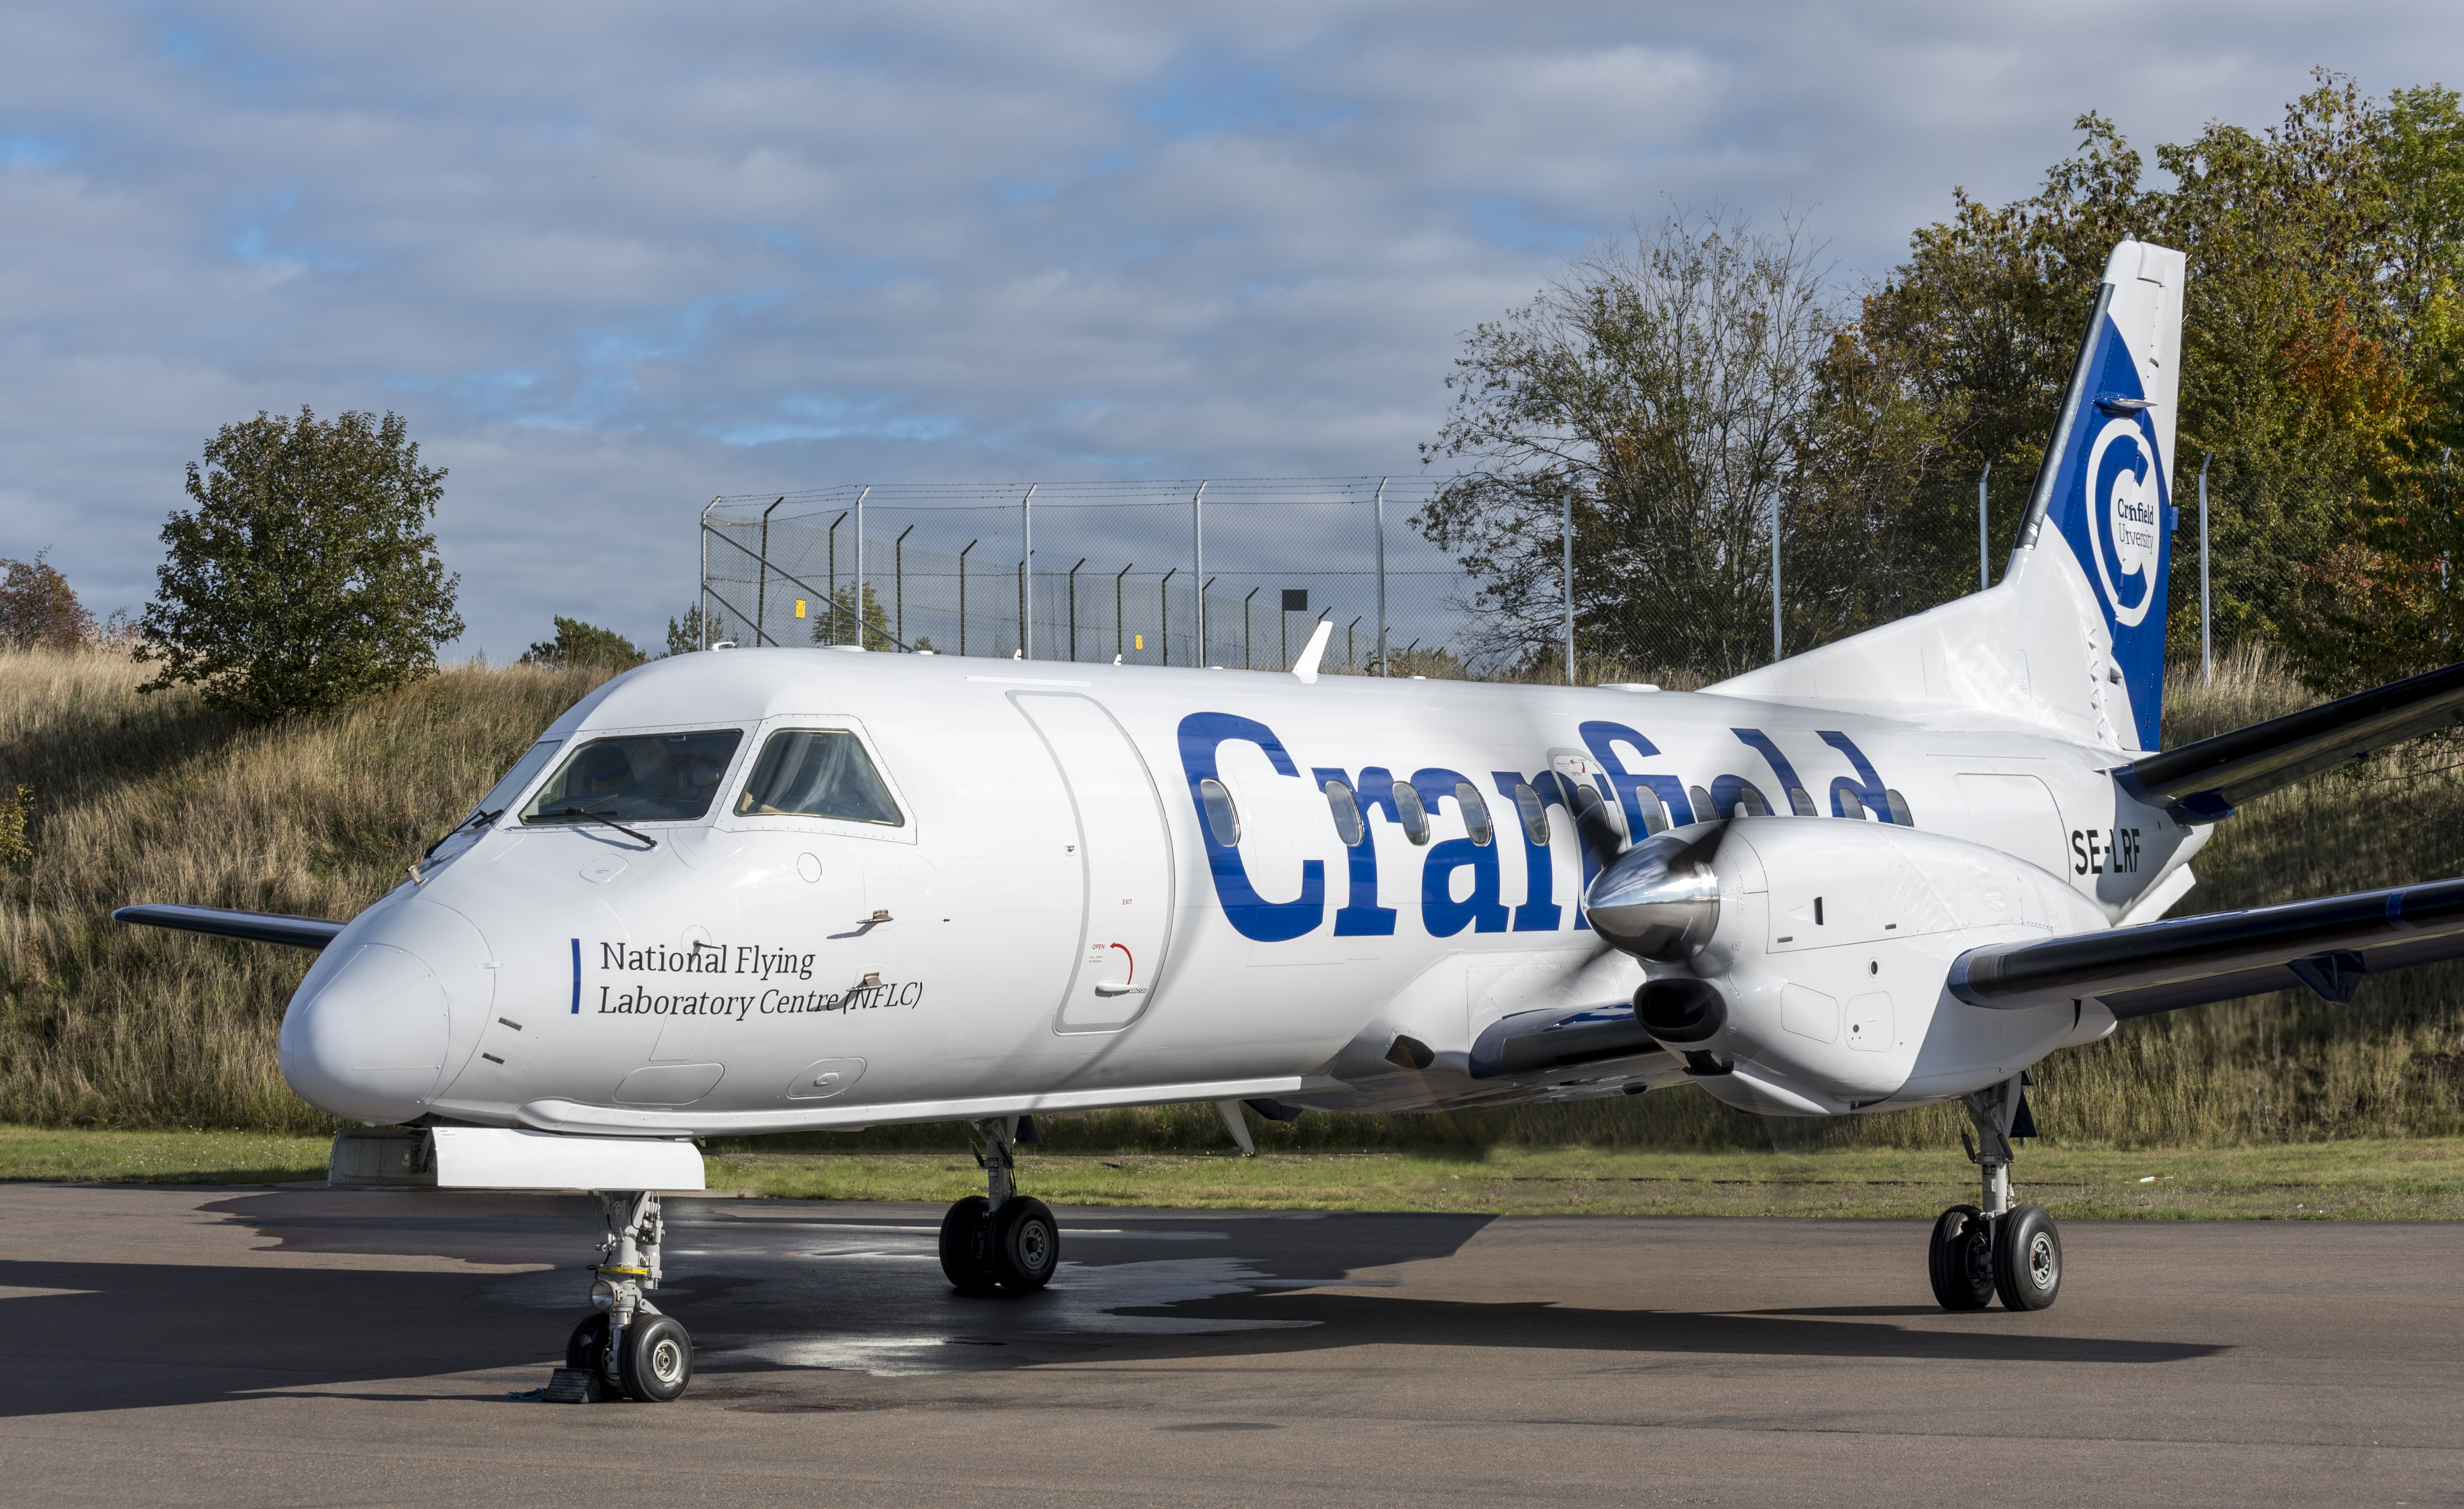 Cranfield Airport prepares for delivery of its Saab 340B